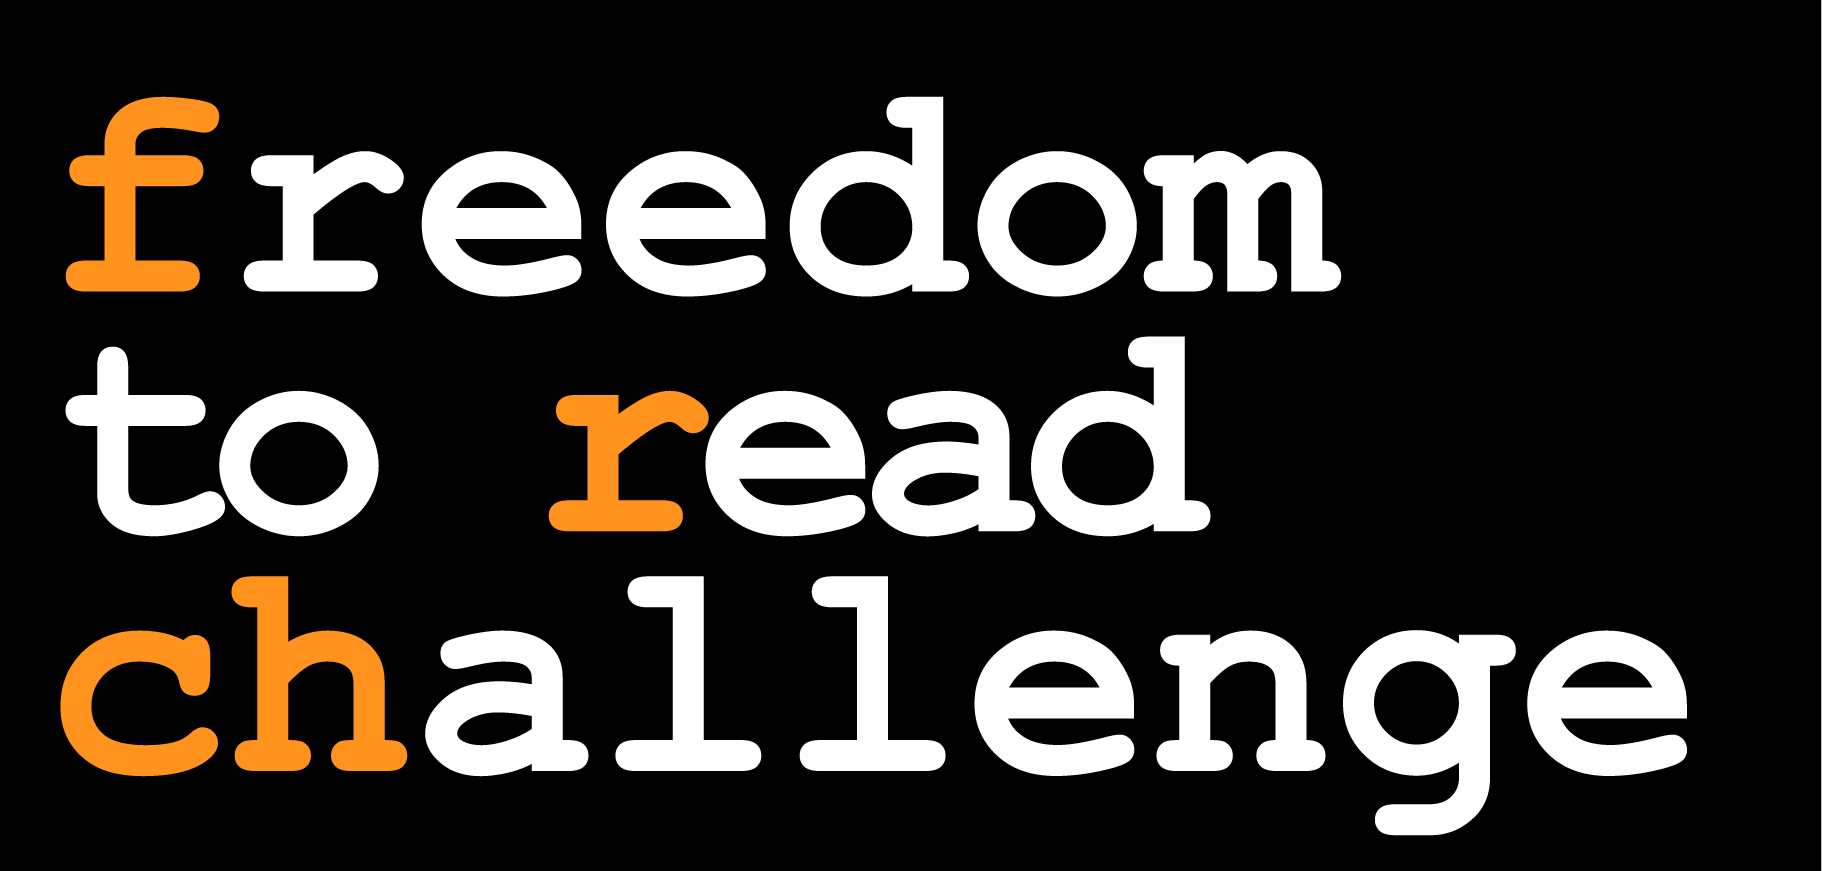 black background with text overlay that says "Freedom to read challenge"